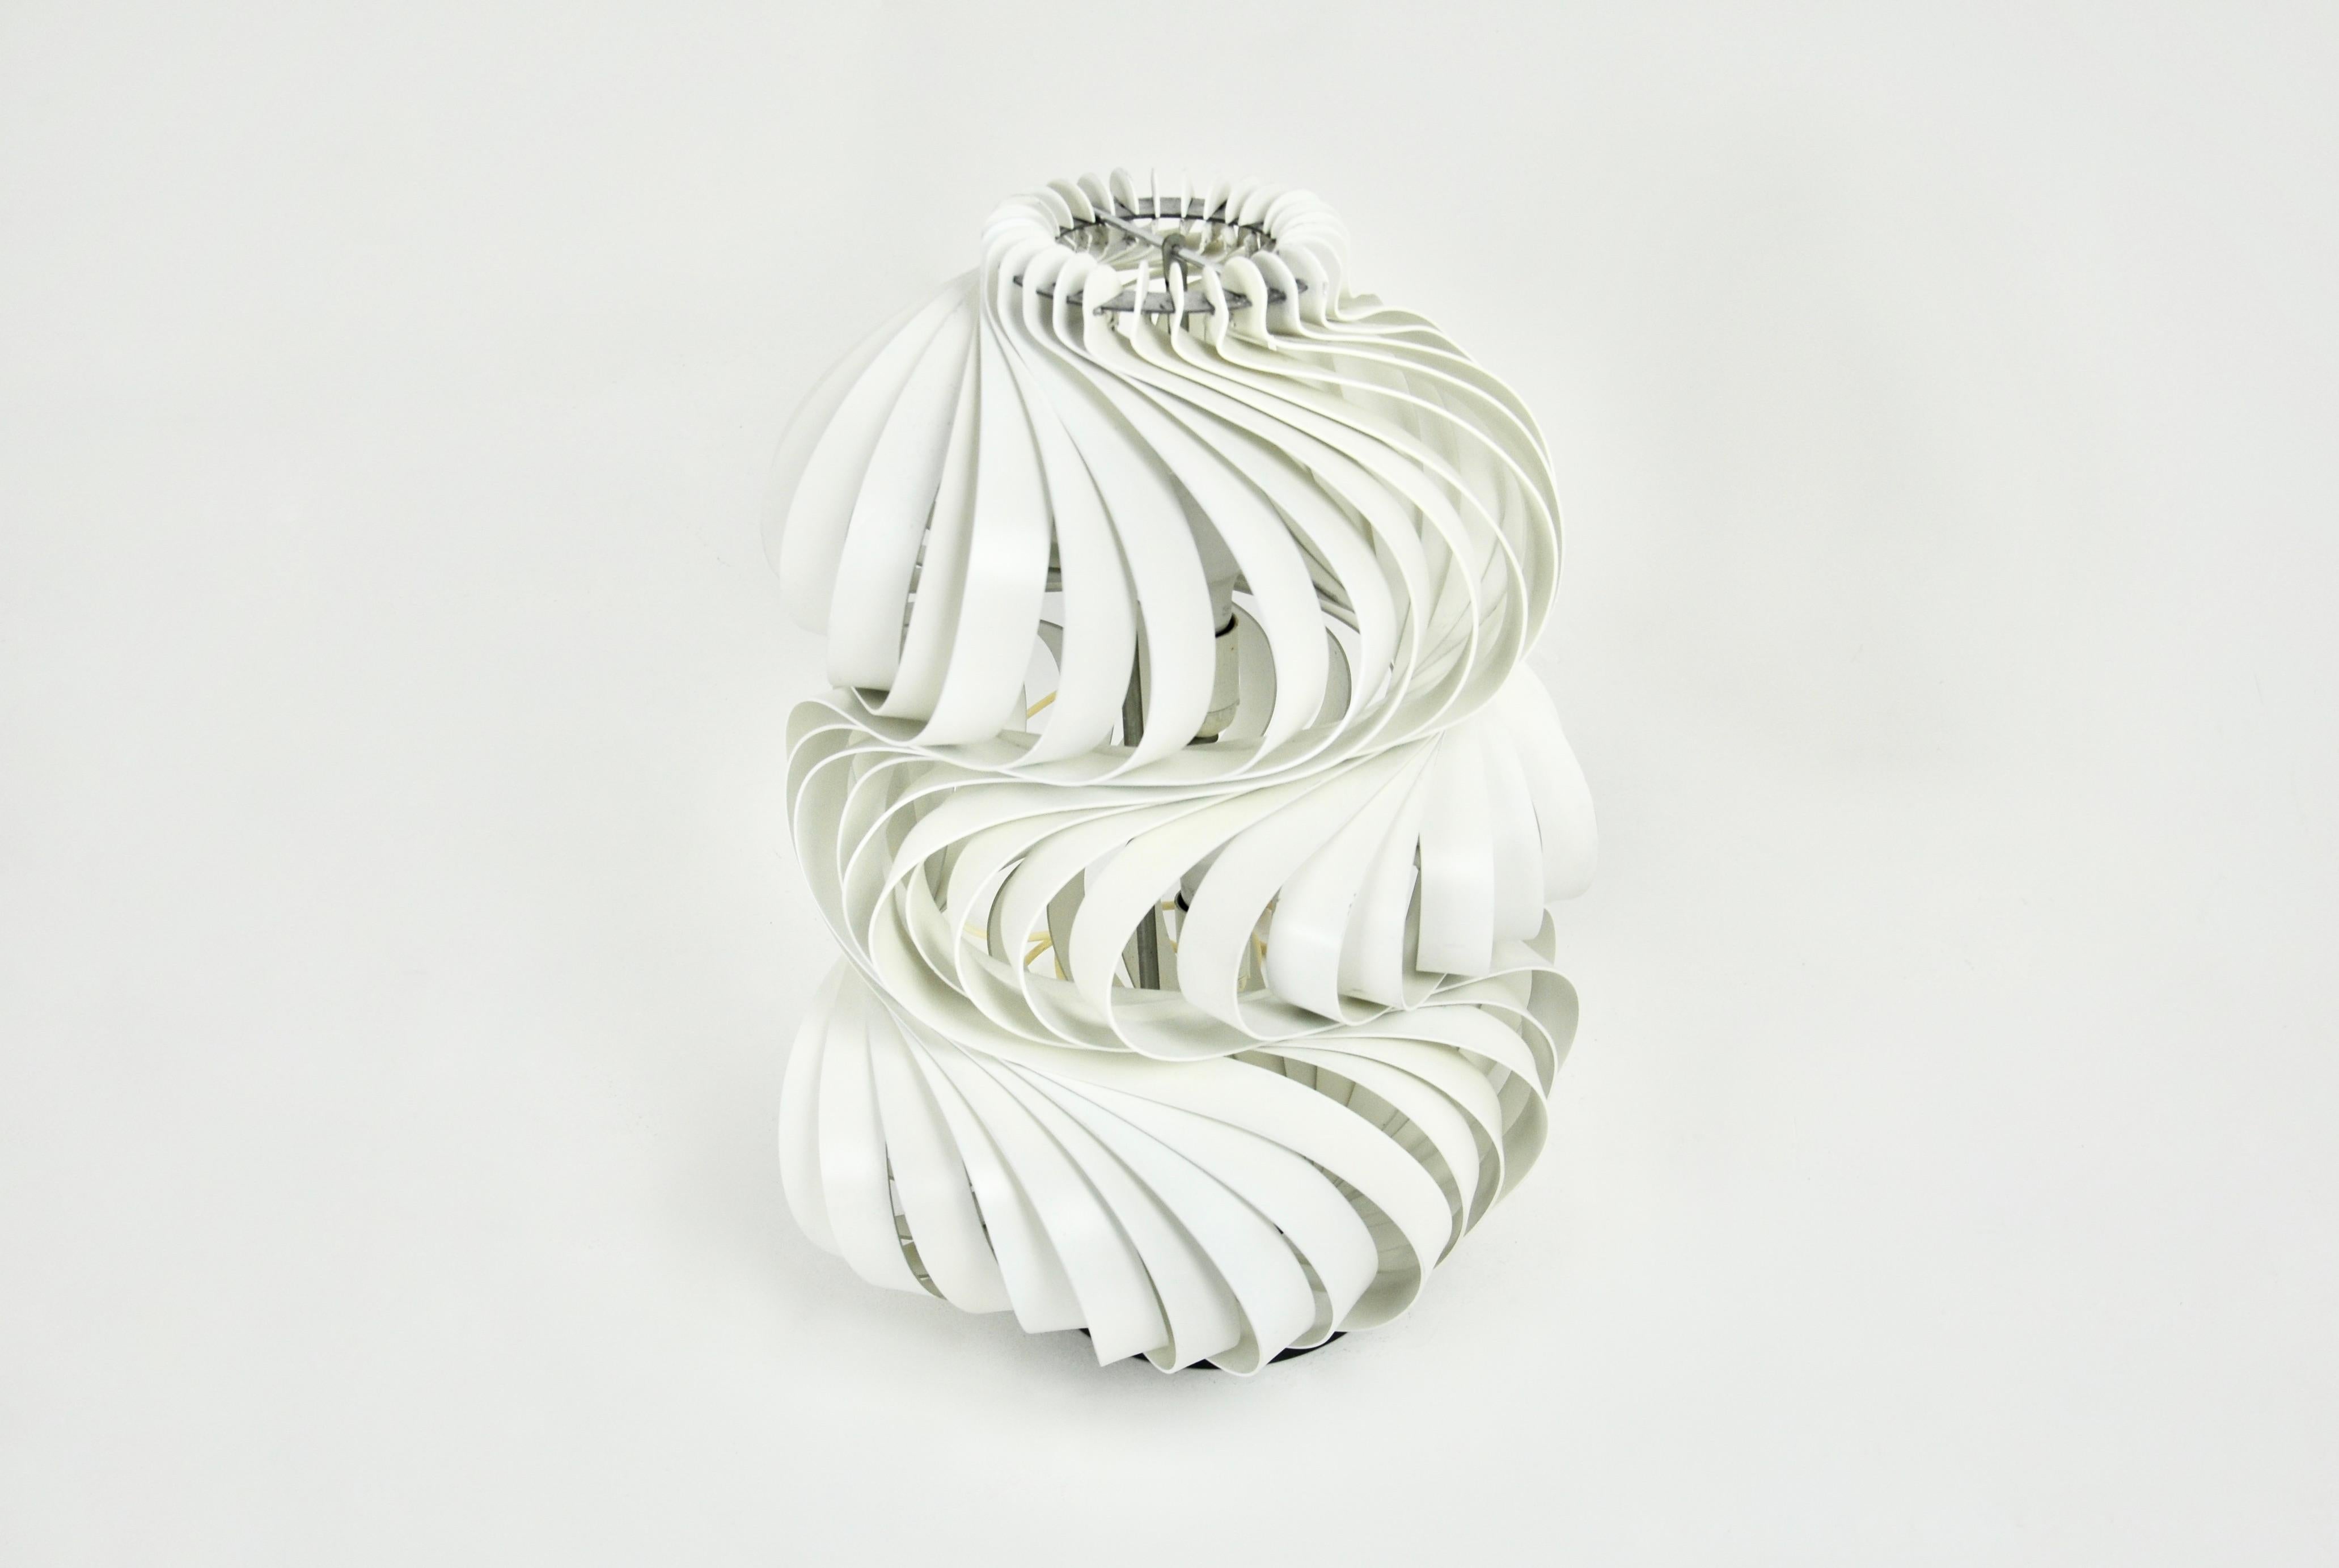 Spiral lamp with white metal blades by Olaf Von Bohr. Model: Médusa. Wear due to time and age of the lamp.